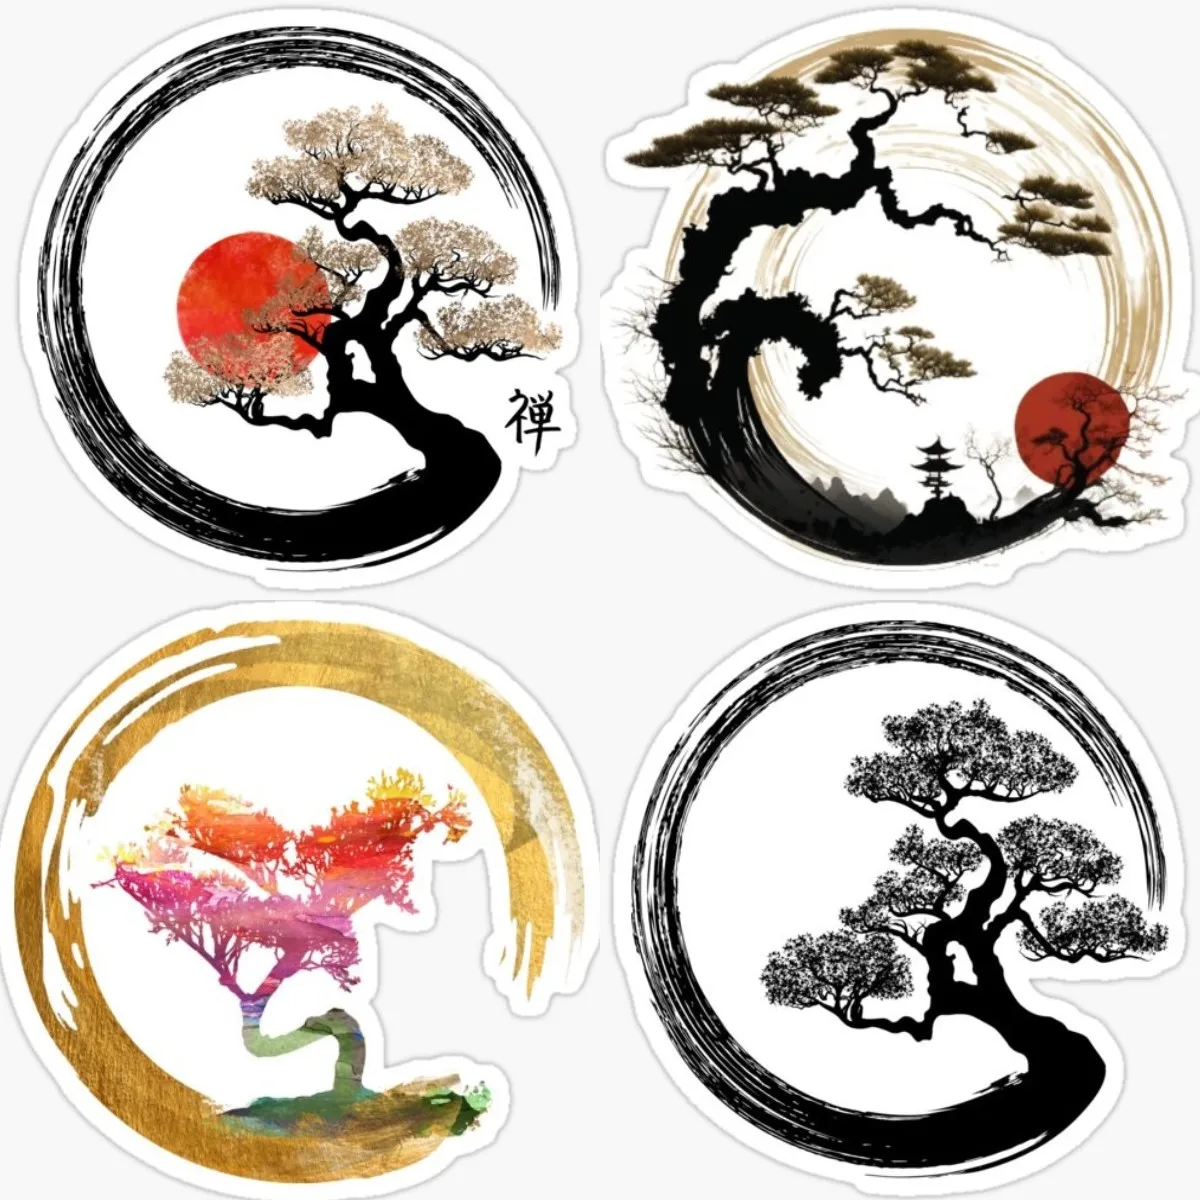 

Enzo Circle Sign Samurai Wall Decal Vinyl Sticker Vehicle Supplies Stickers for Car Accessories Gadgets Off Road Gadget Laptop